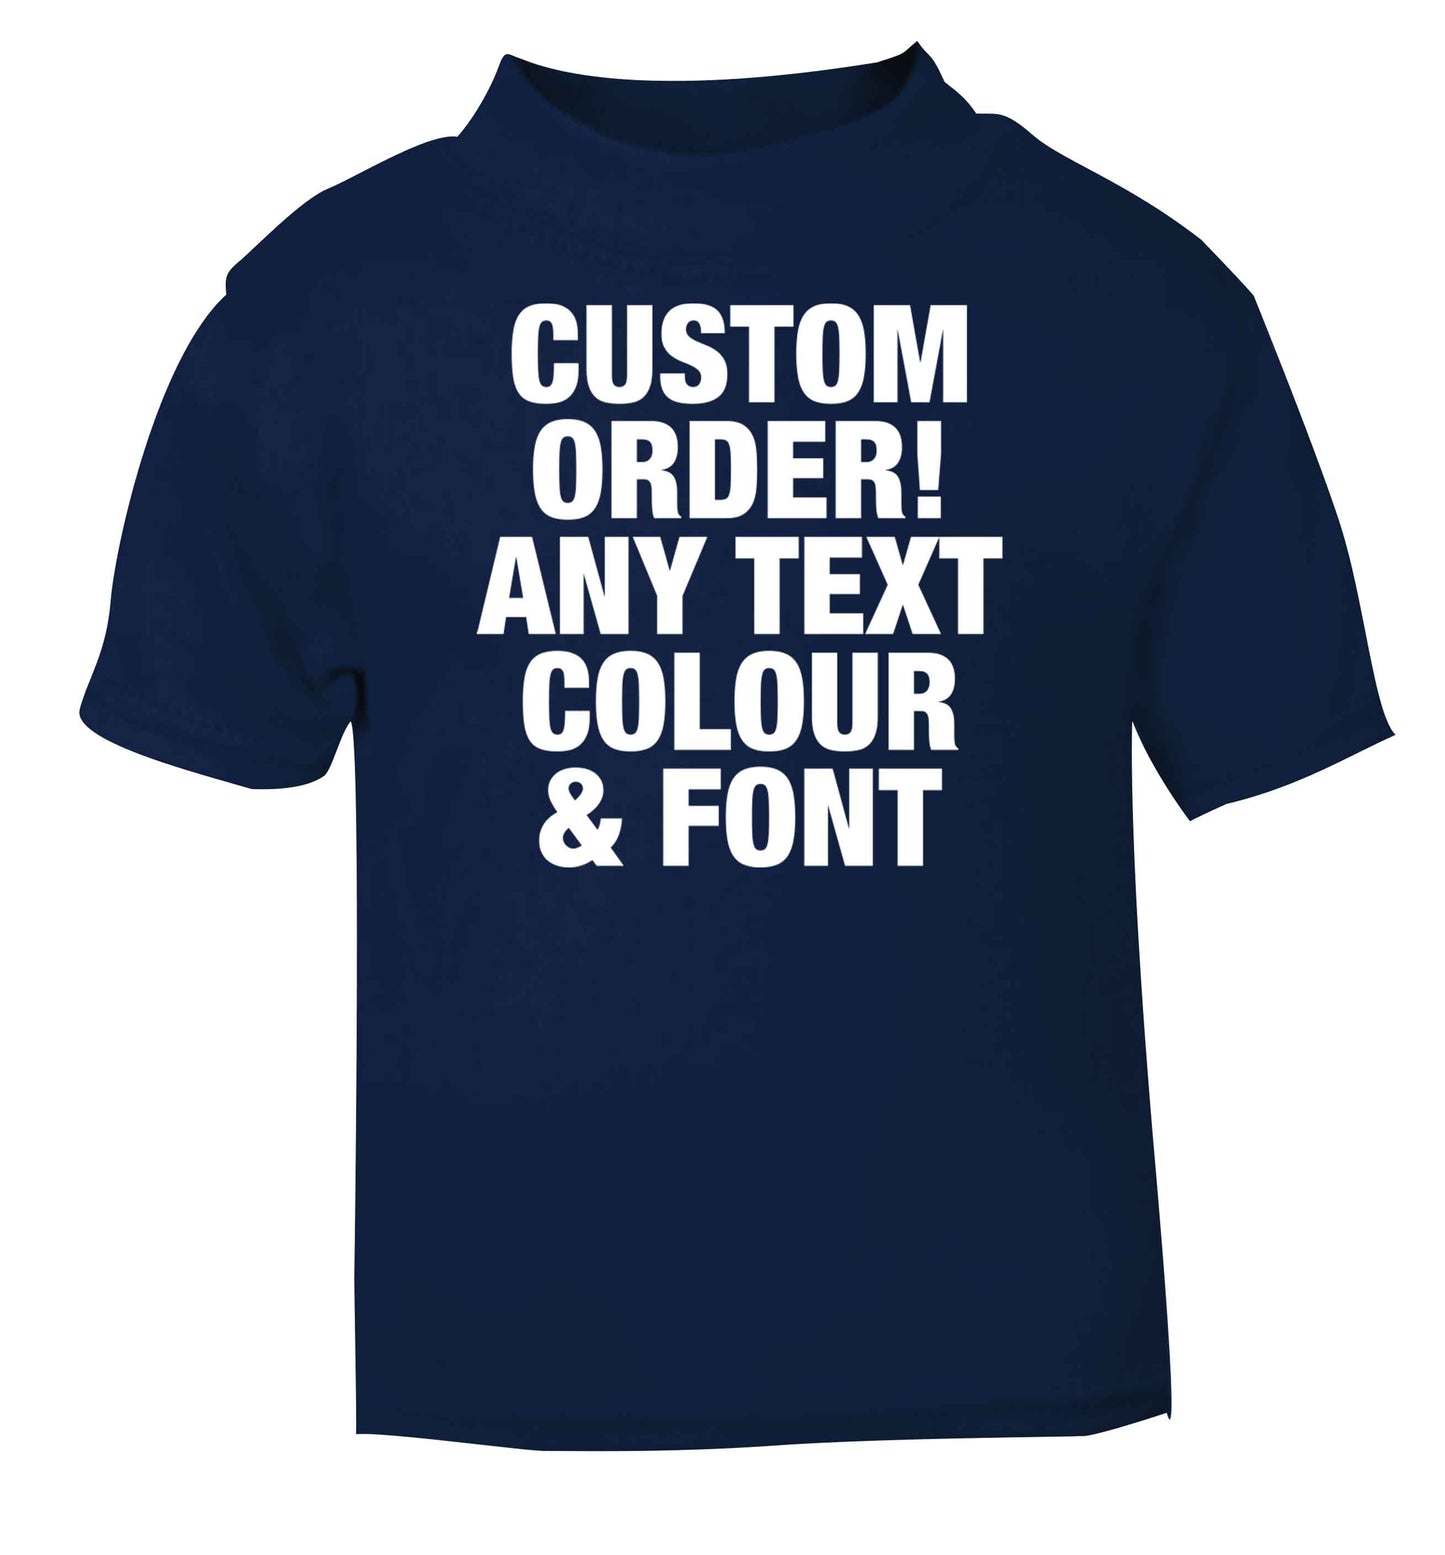 Custom order any text colour and font navy baby toddler Tshirt 2 Years